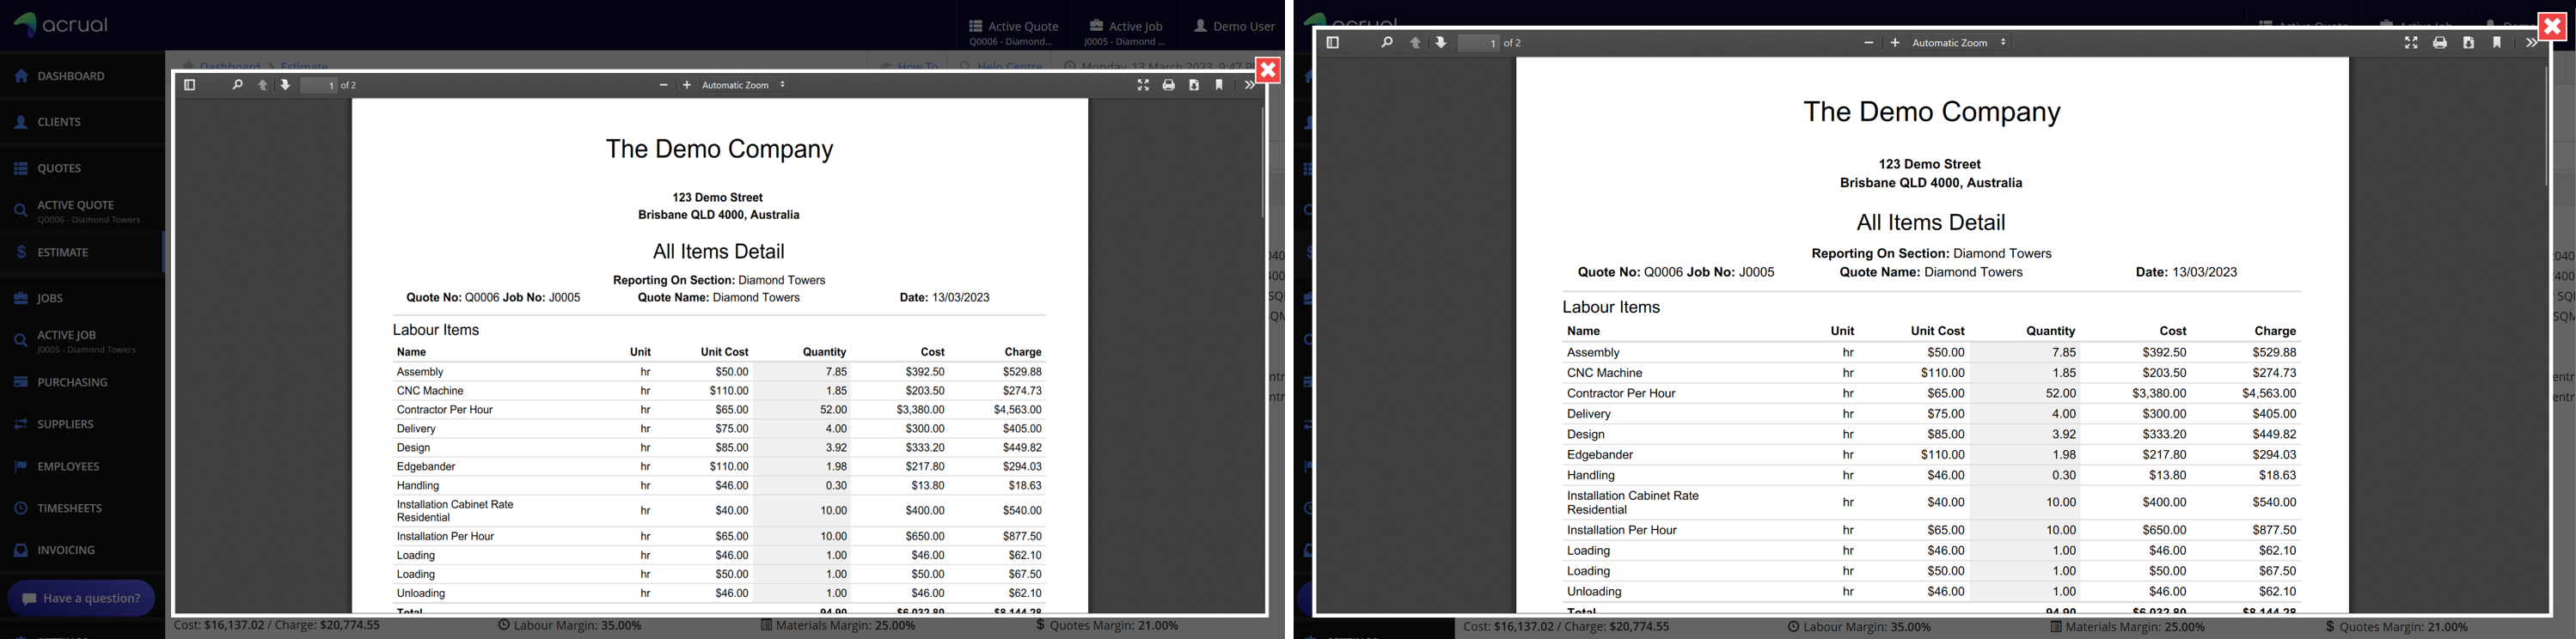 The size of the old report viewer vs. the new